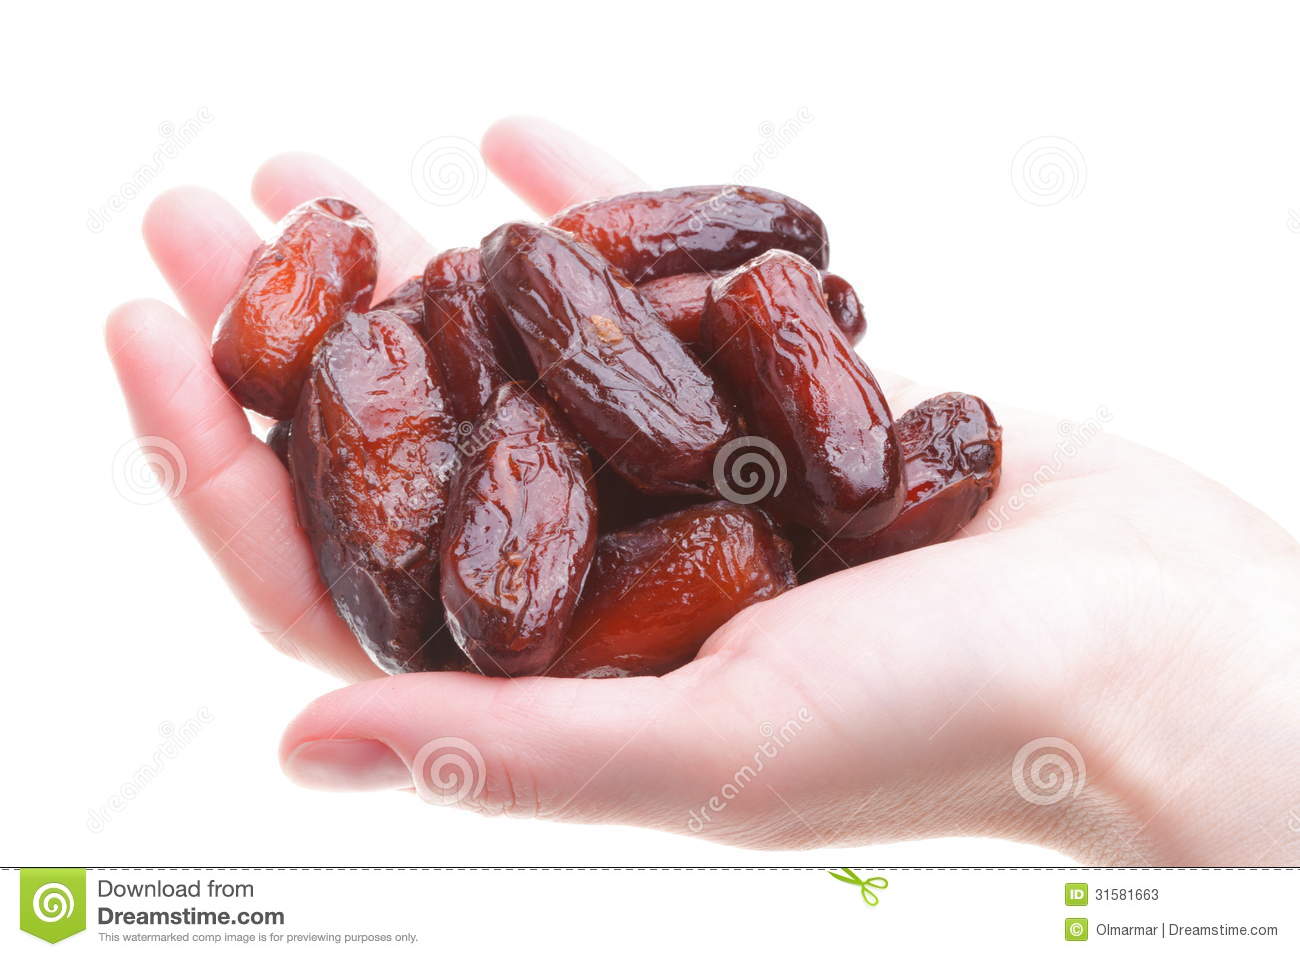 dried-date-fruits-palm-isolated-hand-whi